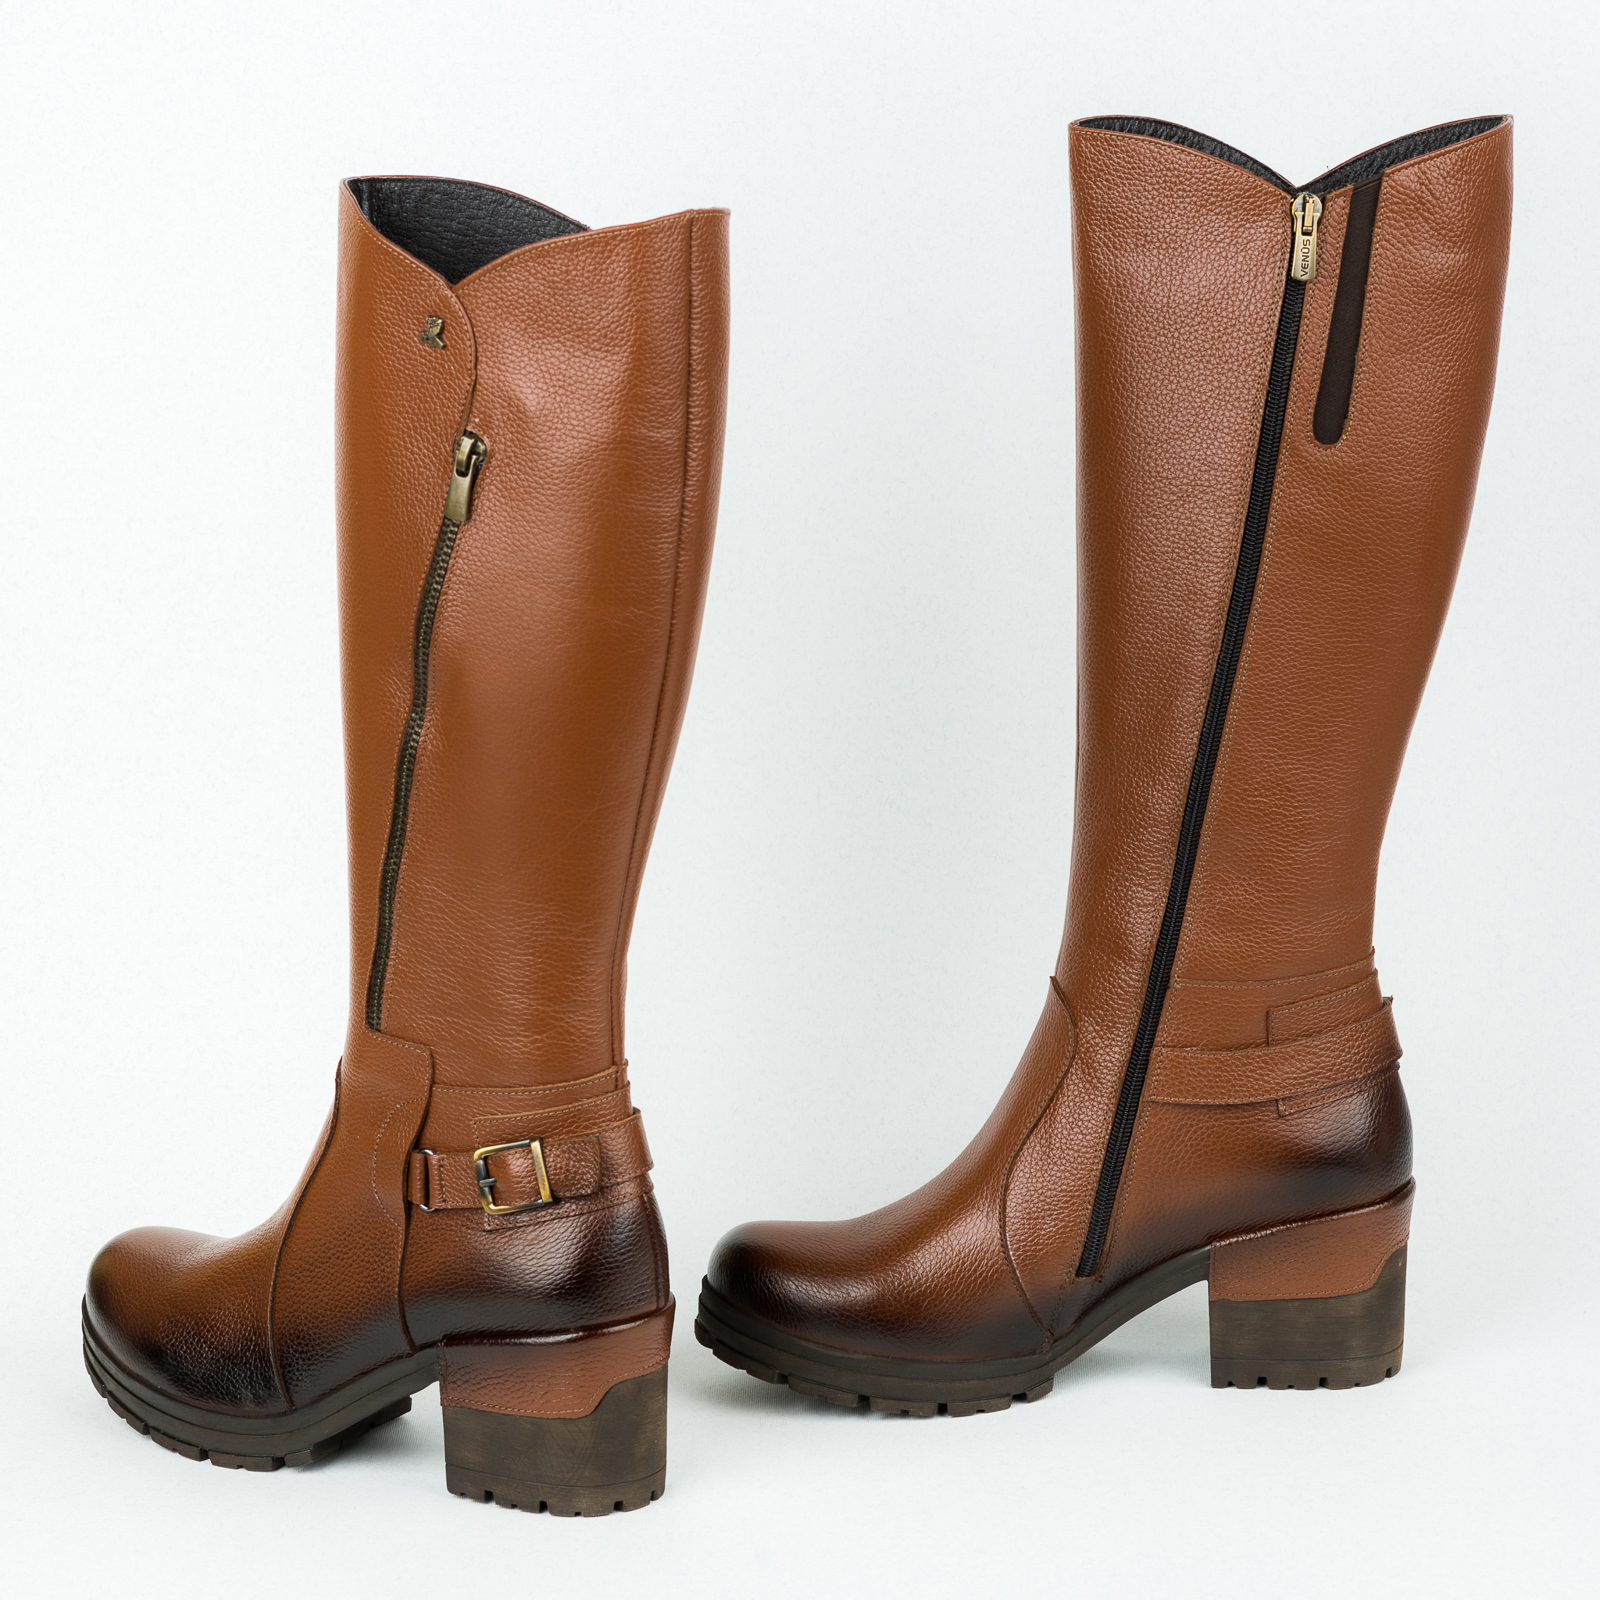 Leather boots B636 - CAMEL